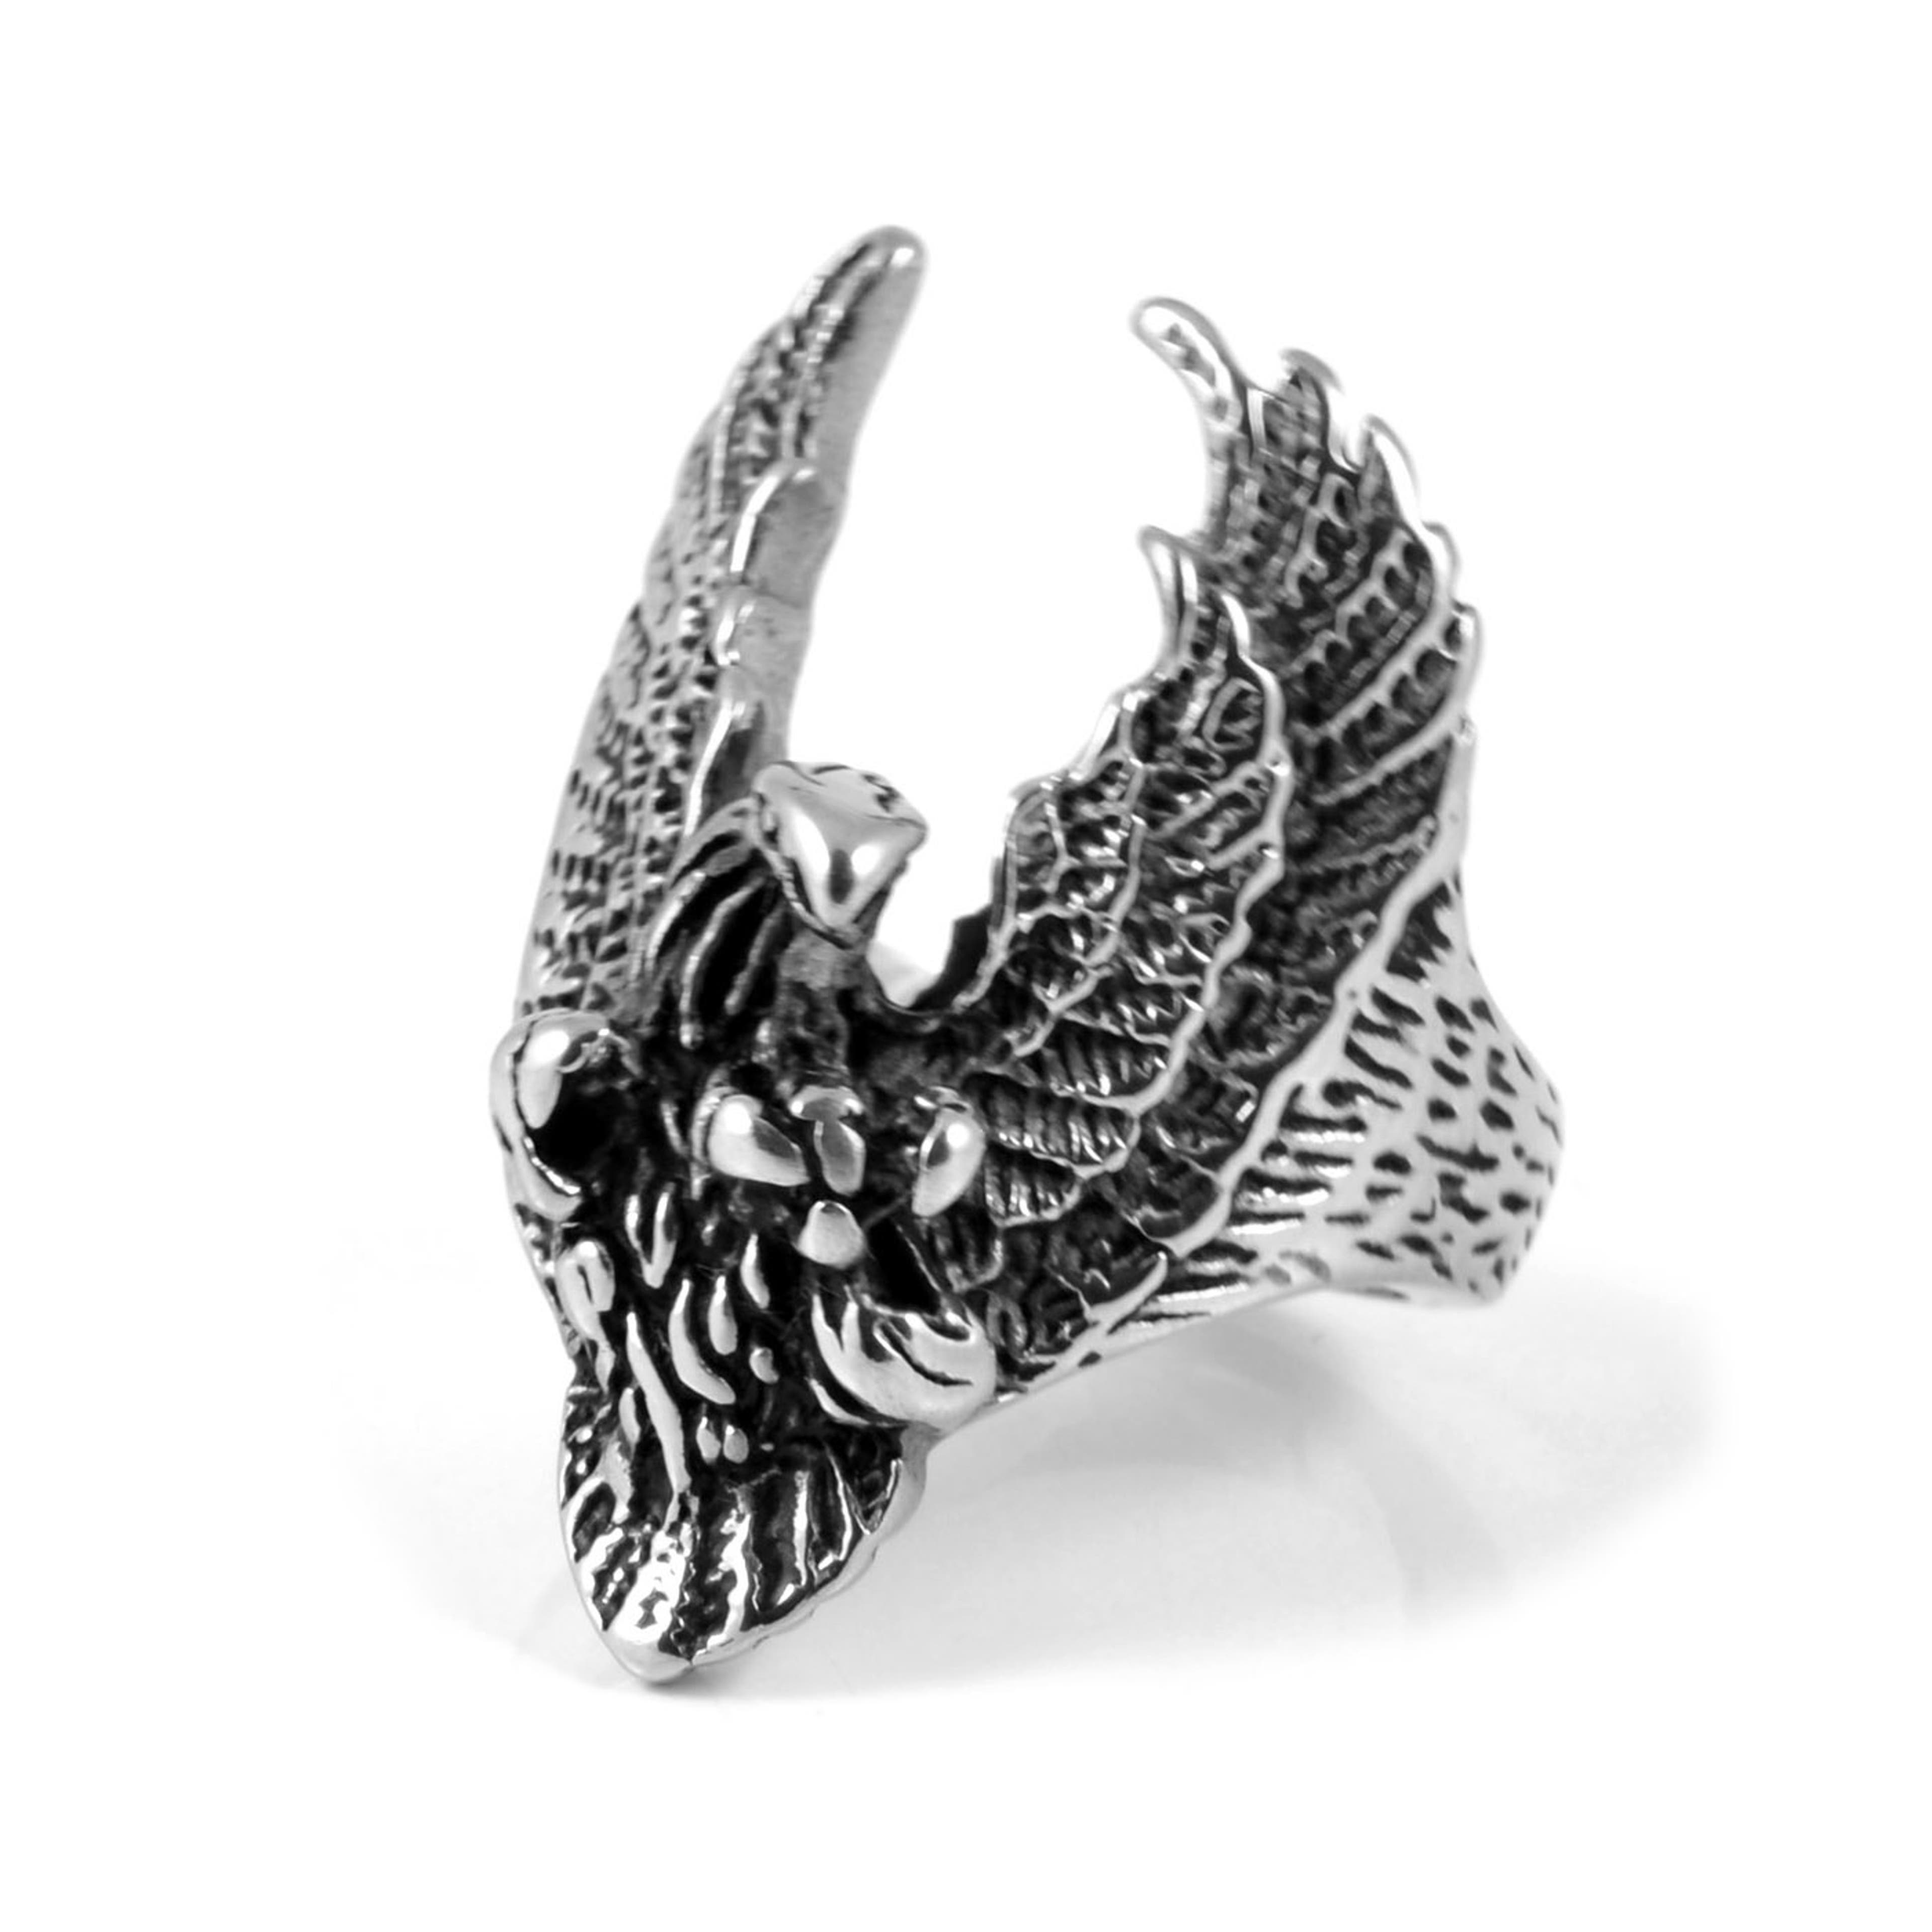 XL Silver-Tone & Black Stainless Steel Eagle Ring